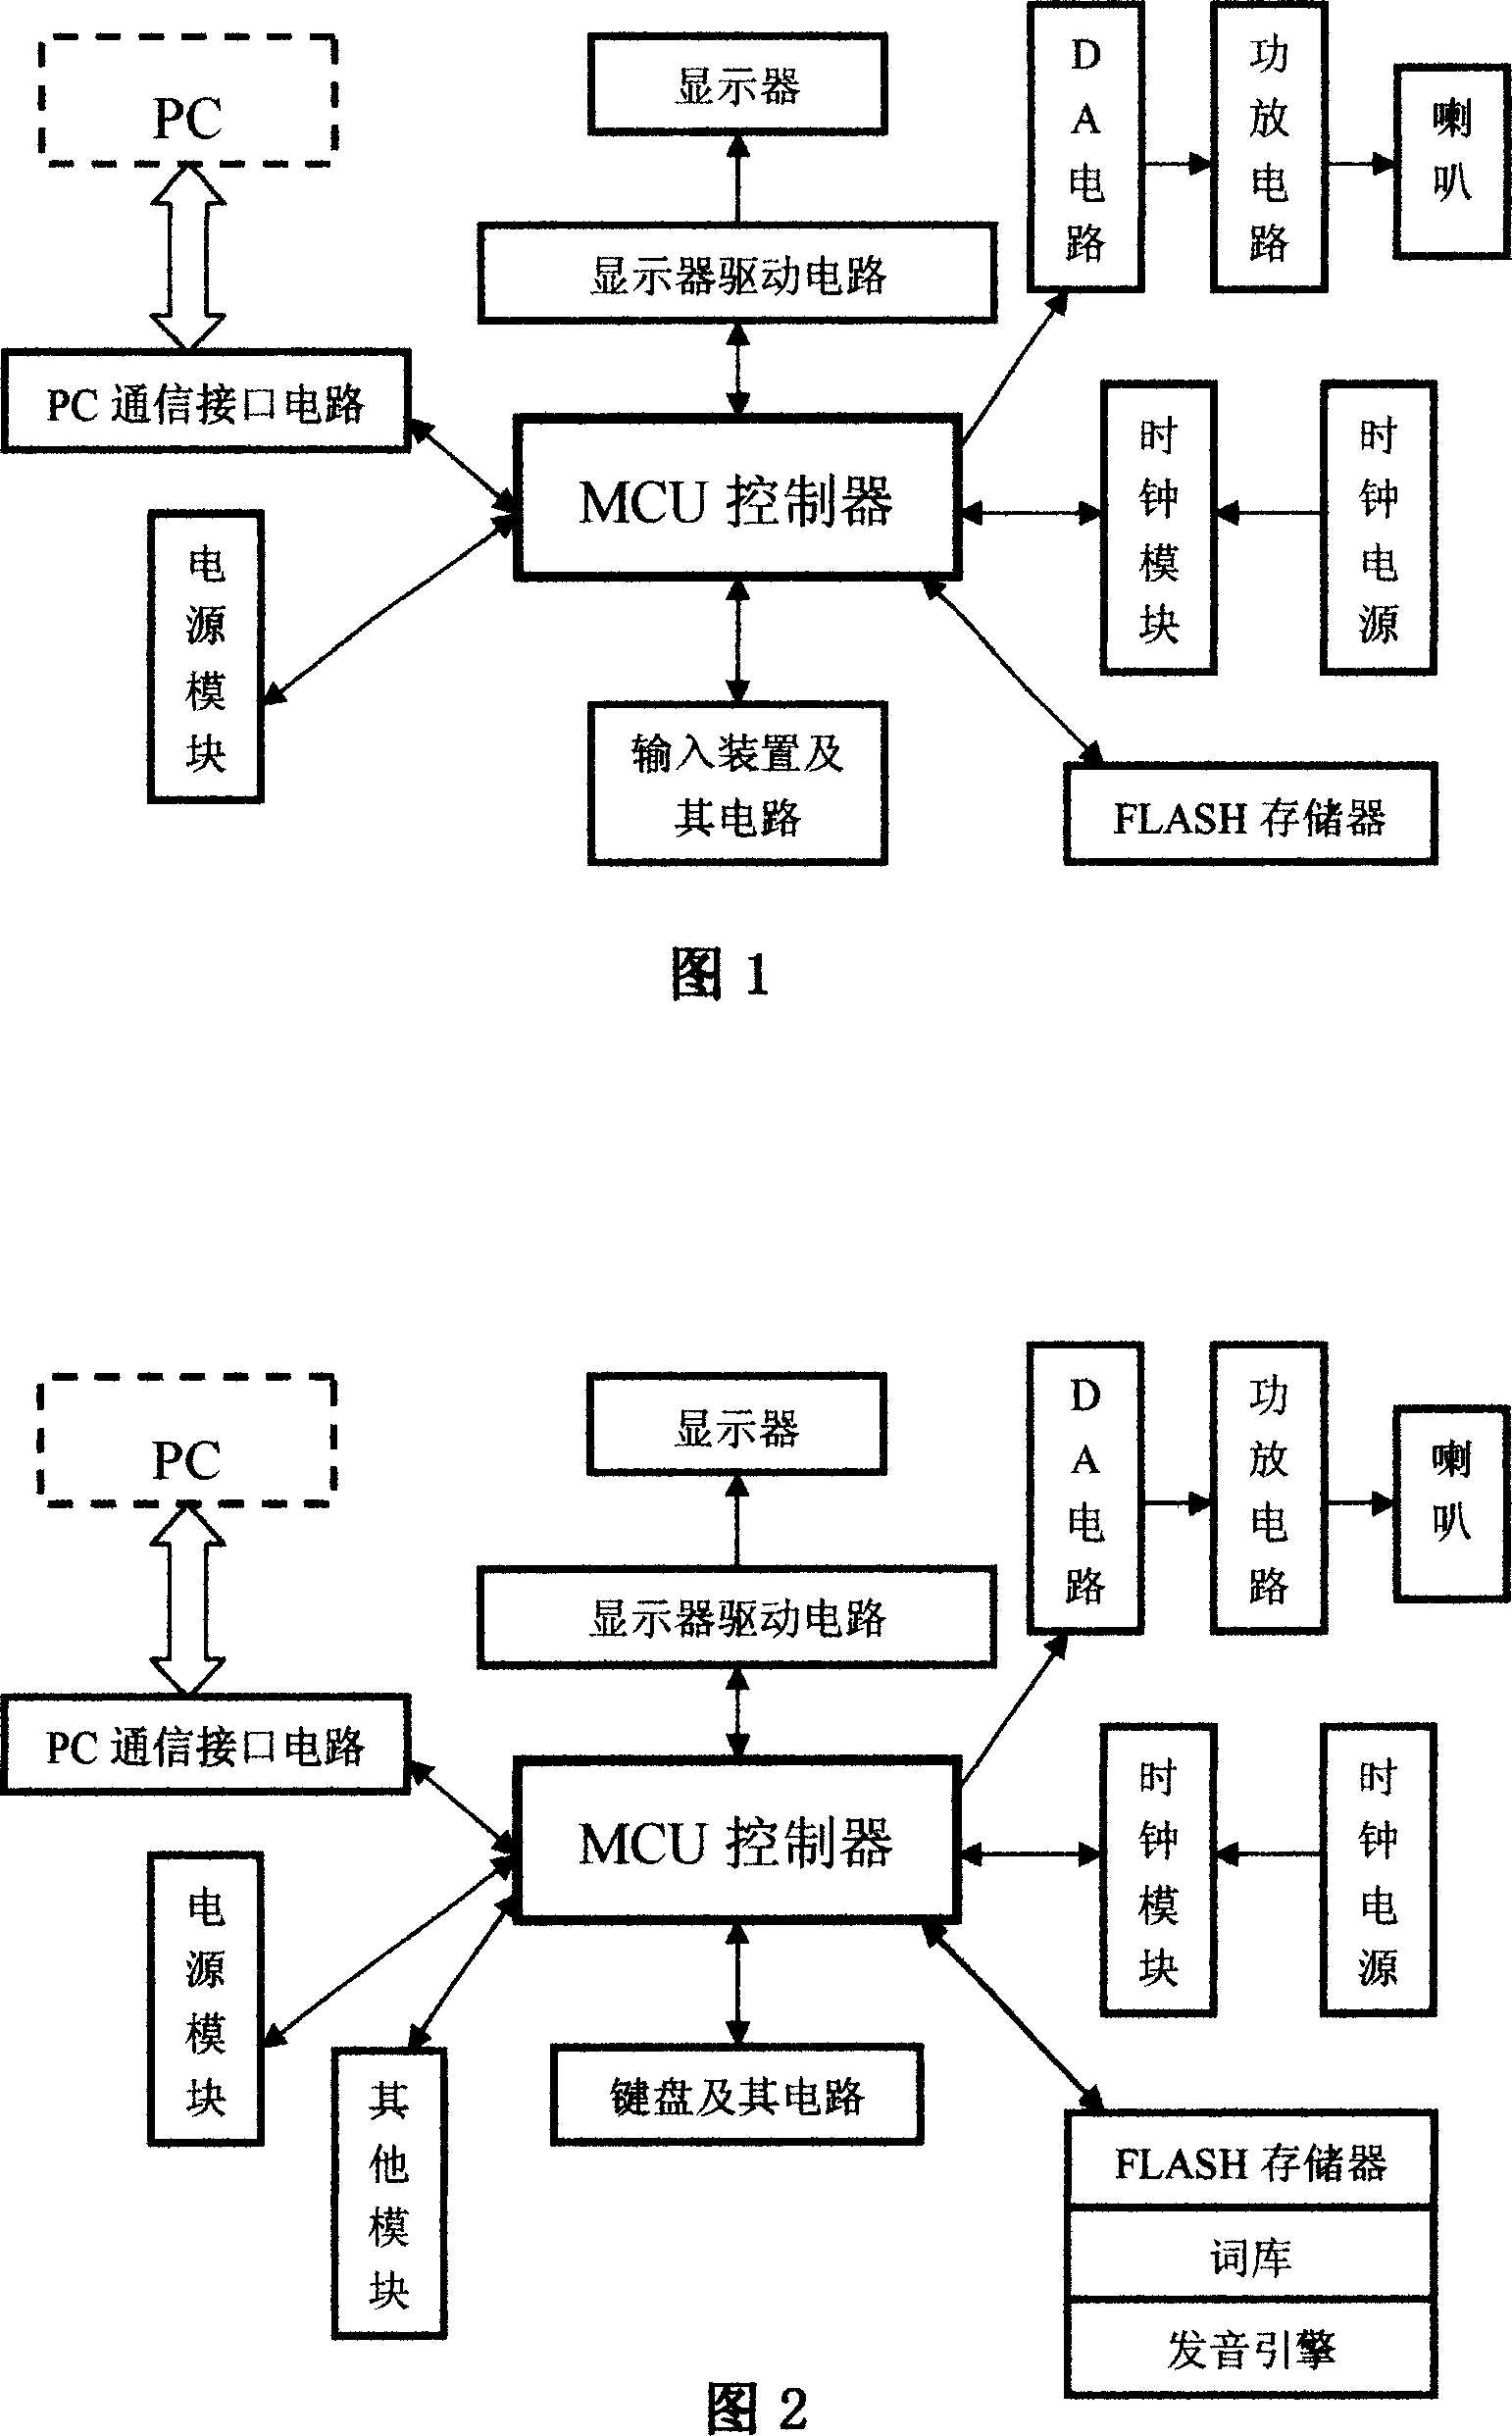 Alarm clock and control method therefor